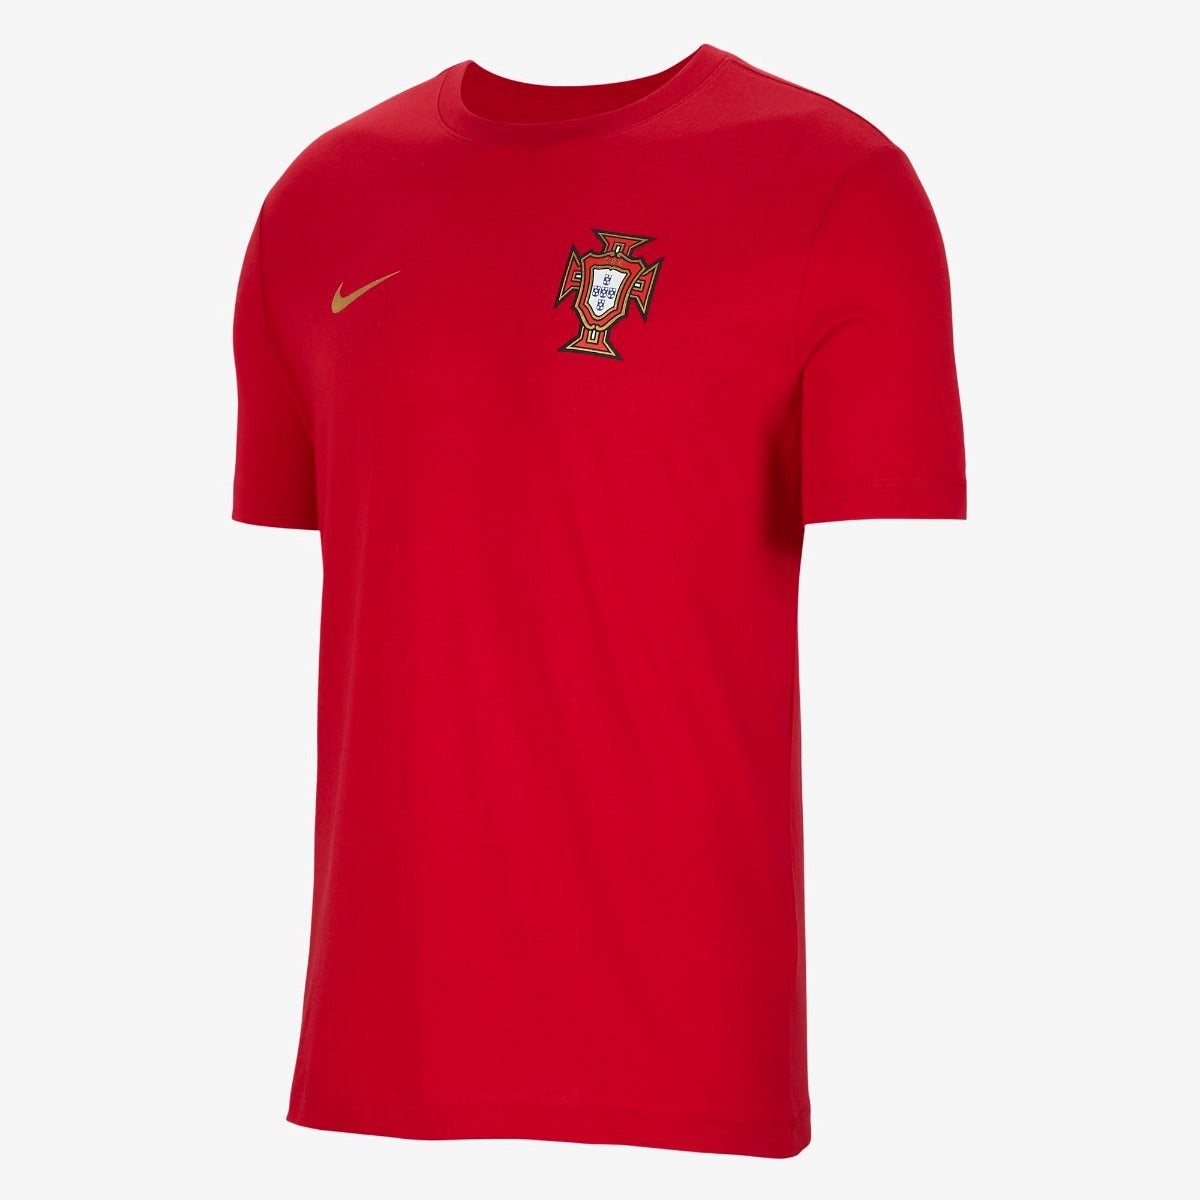 Nike 2020-21 Portugal CR7 Name and Number Tee - Red